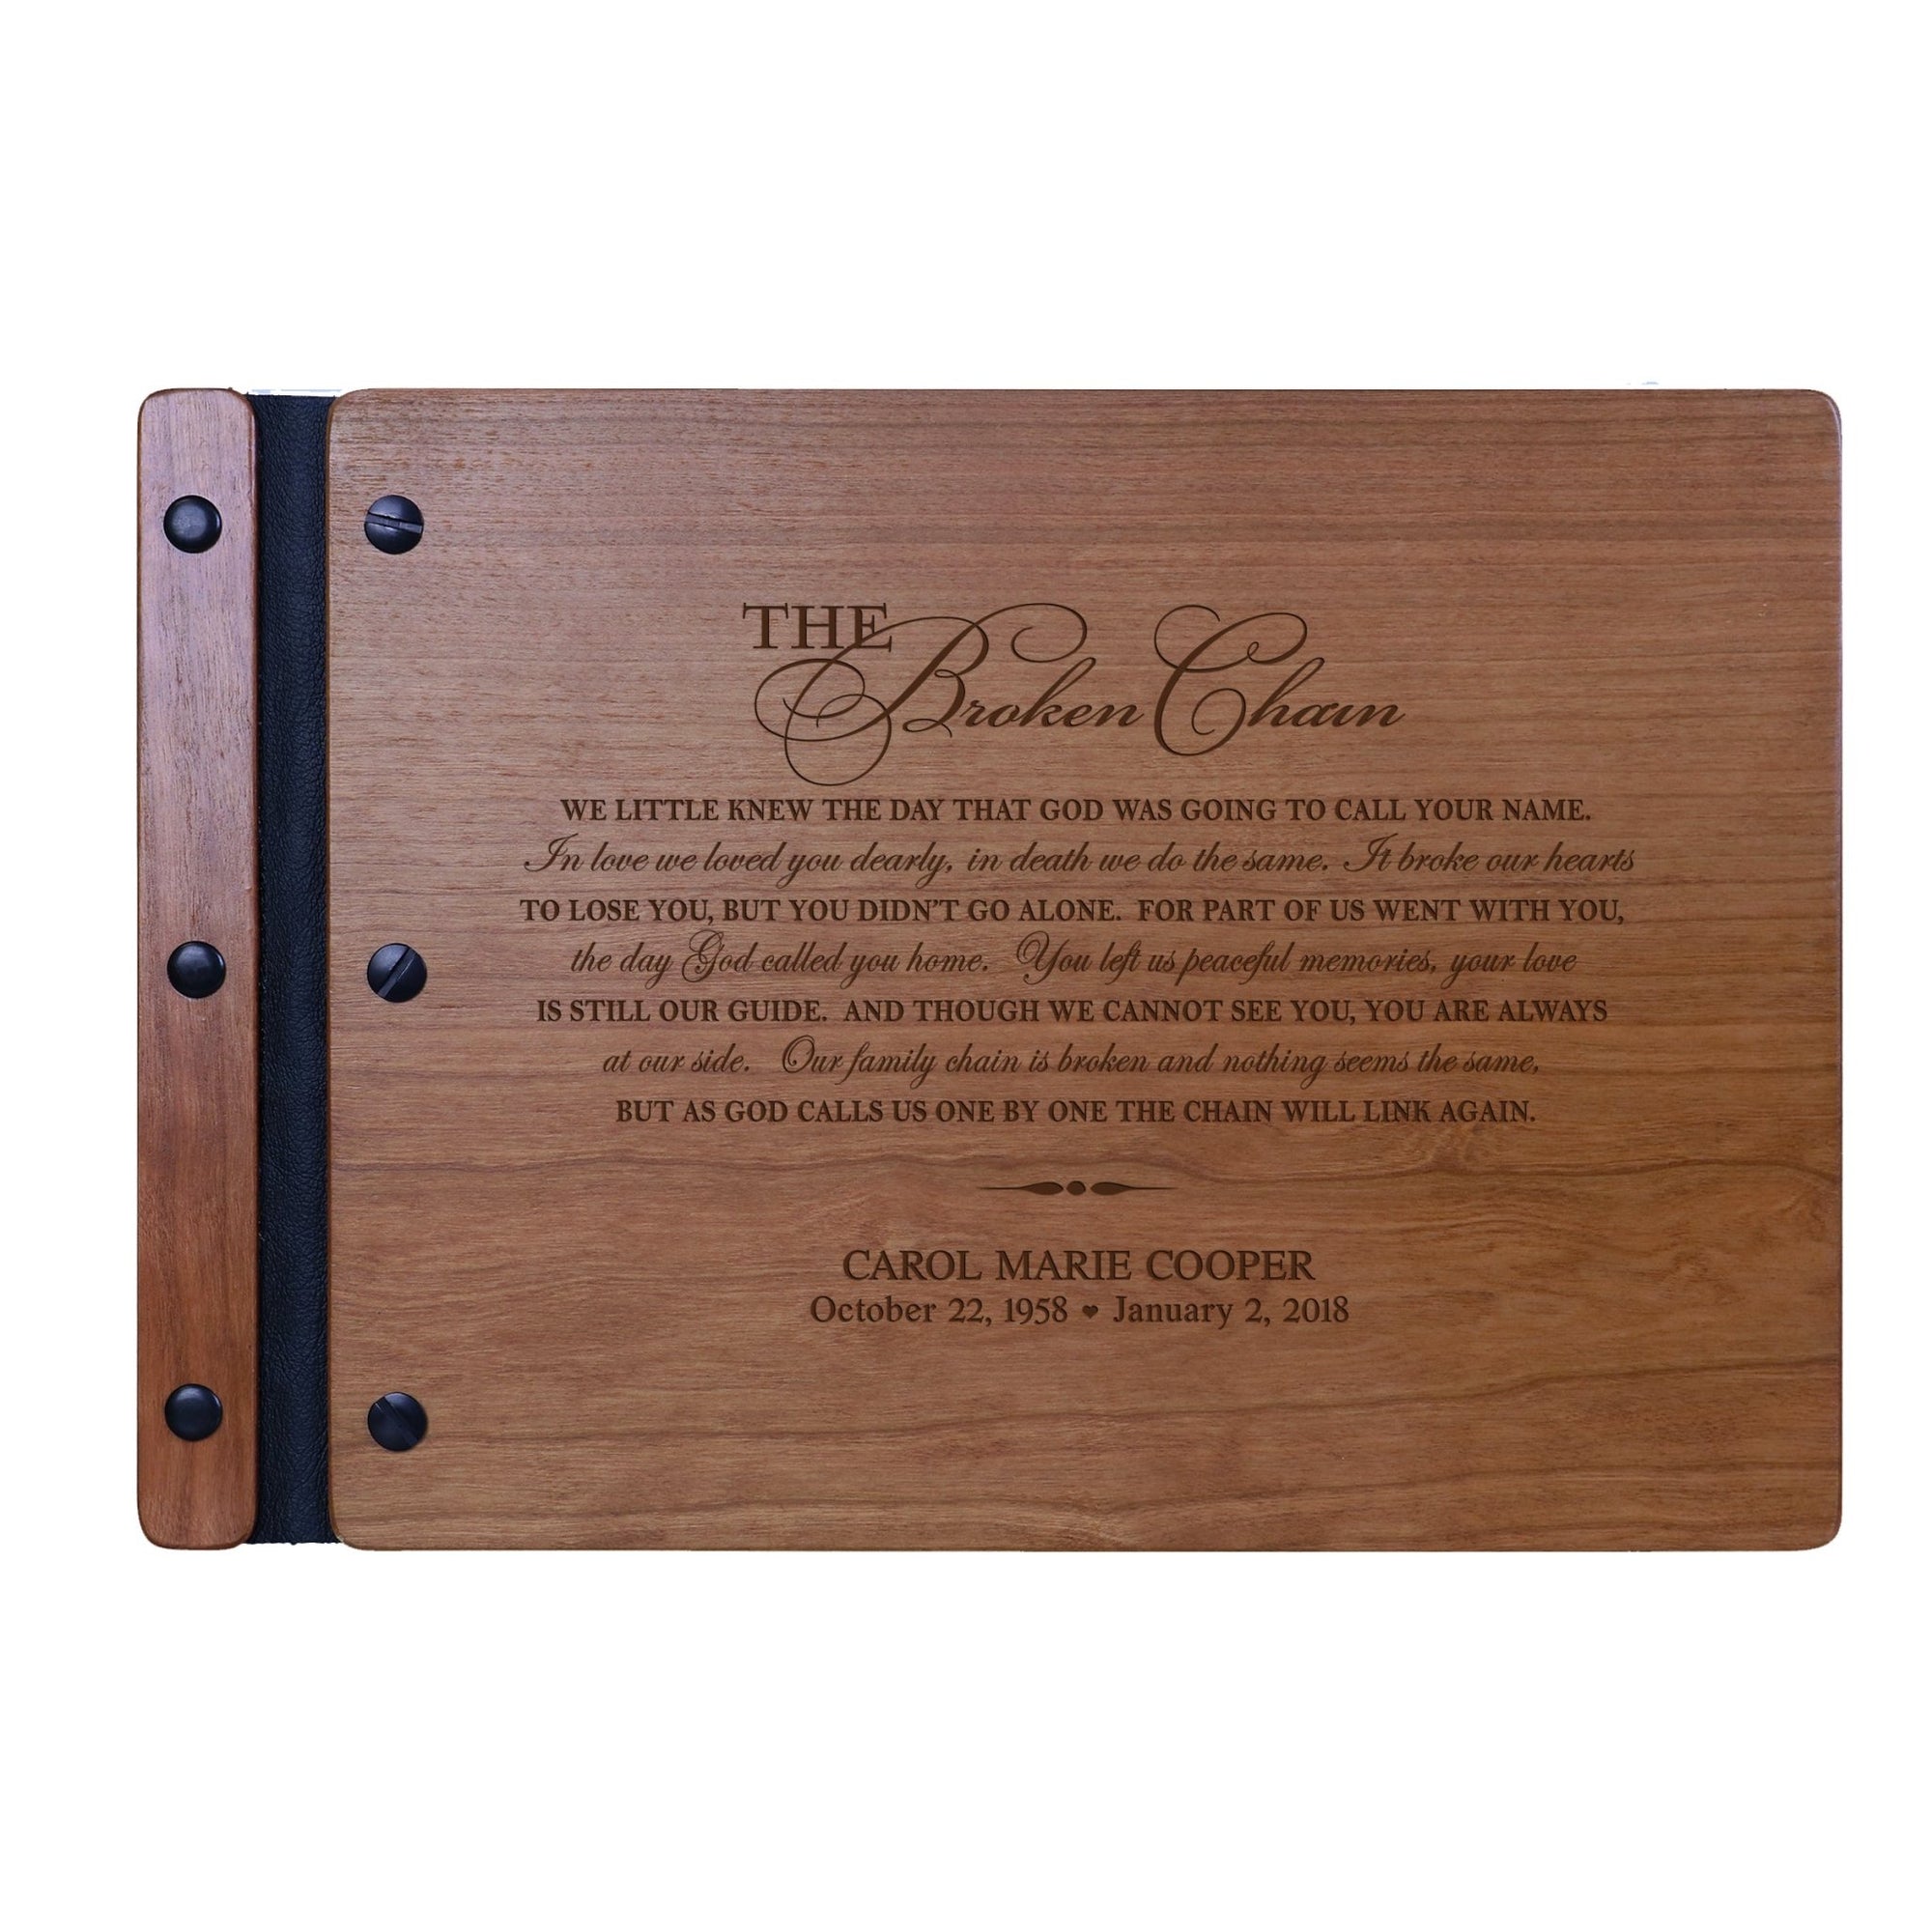 Personalized Memorial Guest Book - The Broken Chain - LifeSong Milestones